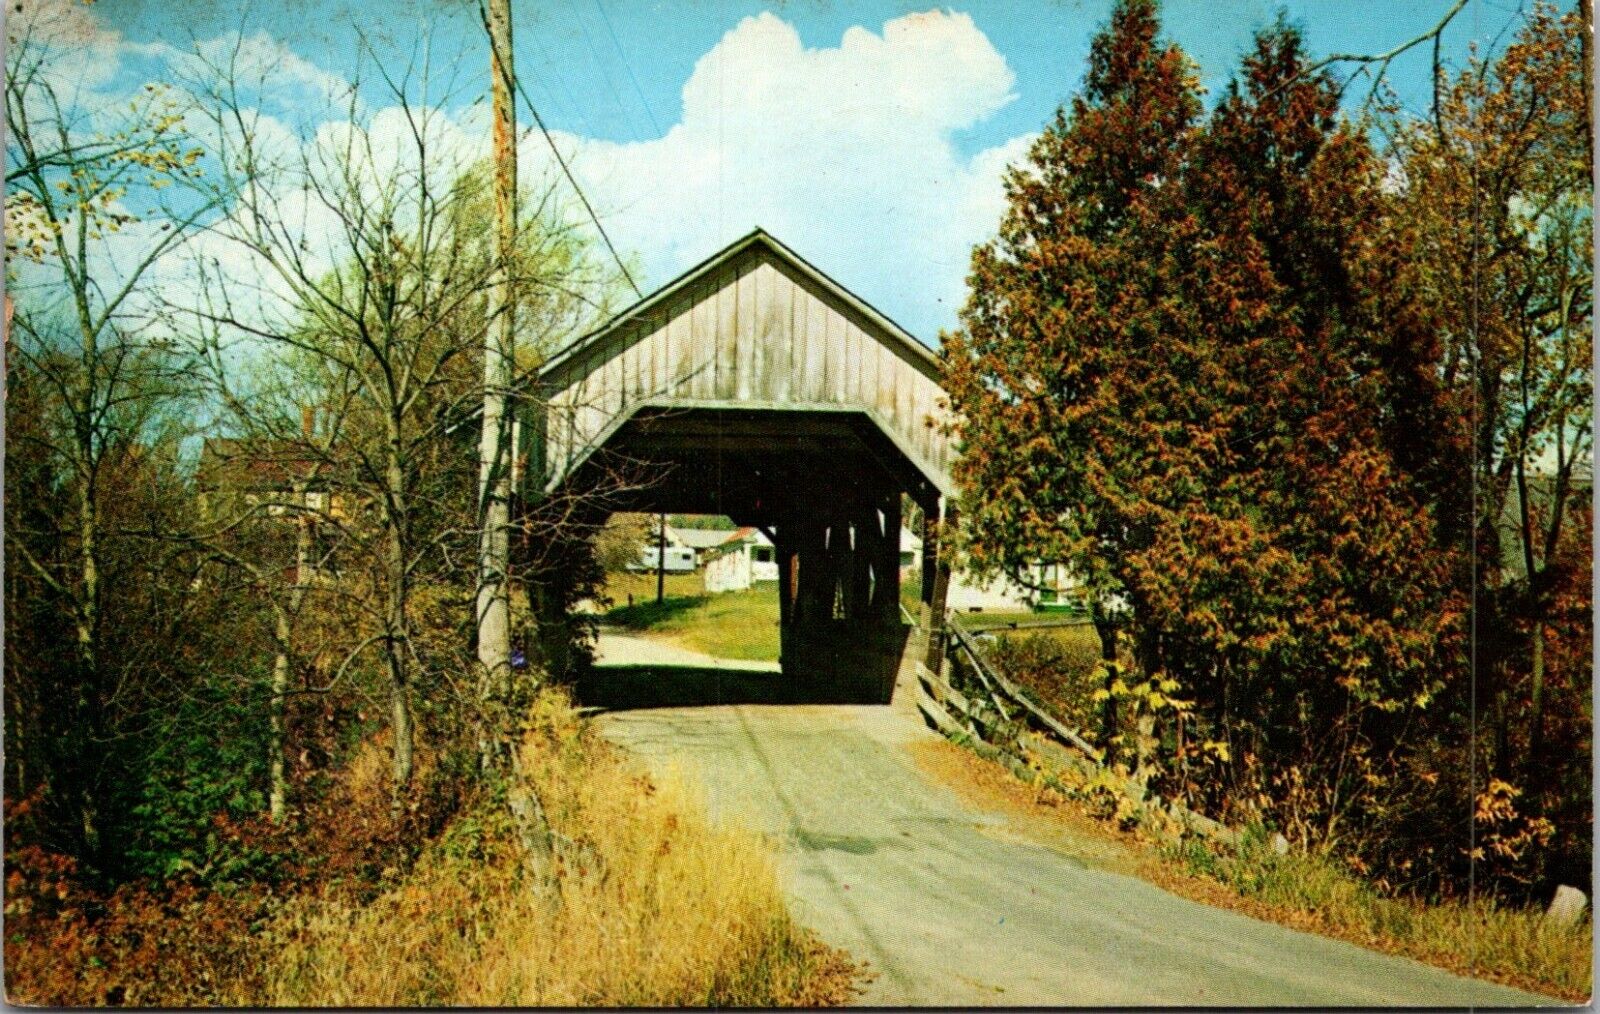 Postcard 1968 One of the Five Old Covered Bridges in Lyndon Vermont VT